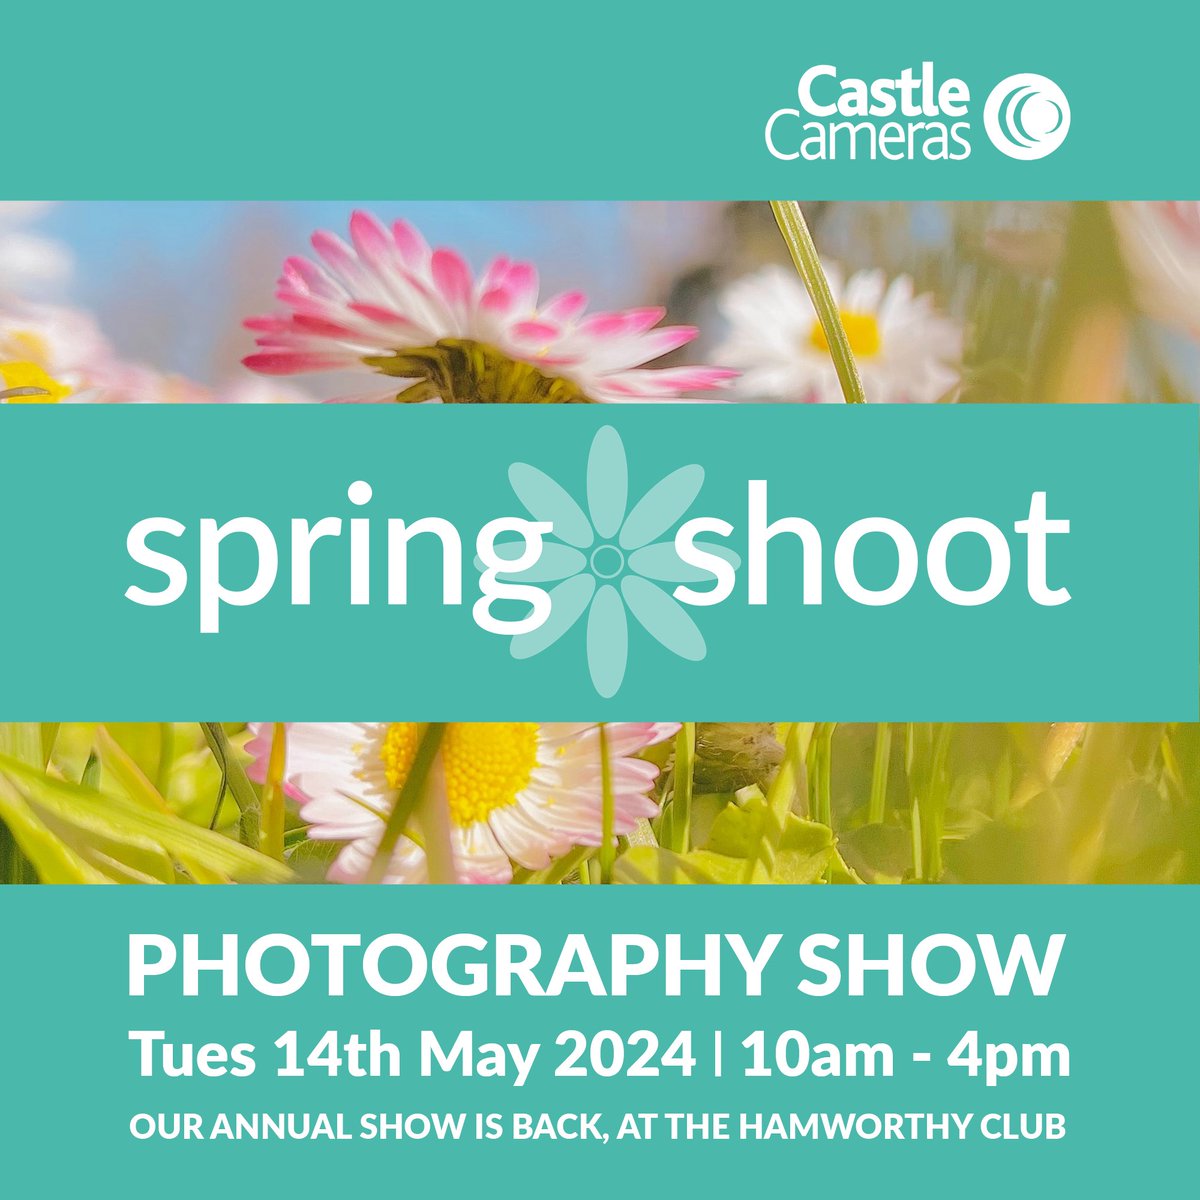 We'll be attending Castle Cameras @castlecameras Spring Shoot show on 14th May 2024. As well as a selection of Billingham bags, there will also be other photographic brands and guest speakers. Sign up for a free ticket now. More info here: castlecameras.co.uk/springshoot.